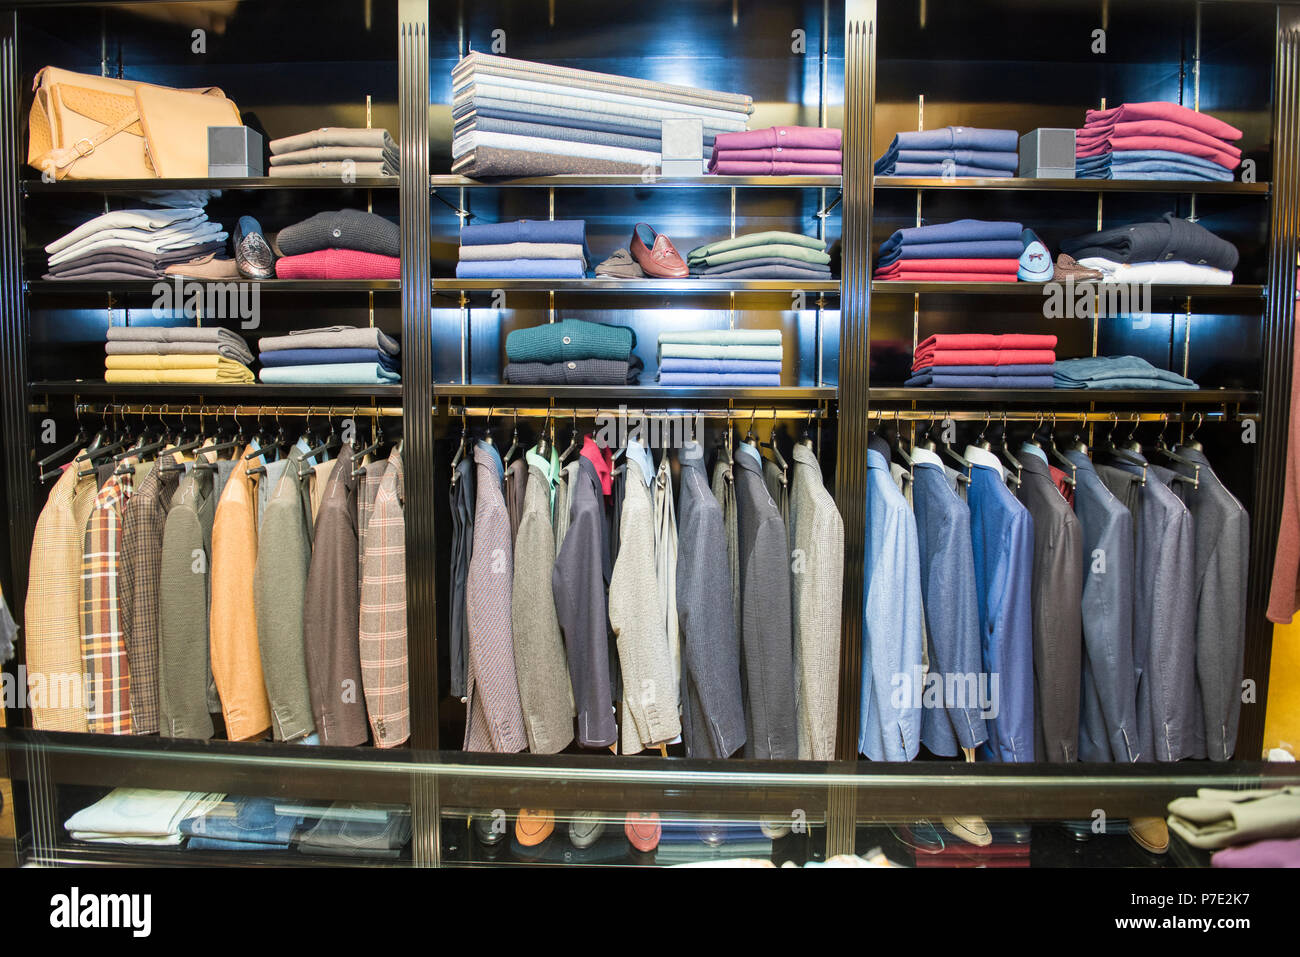 British Tailors High Resolution Stock Photography and Images - Alamy